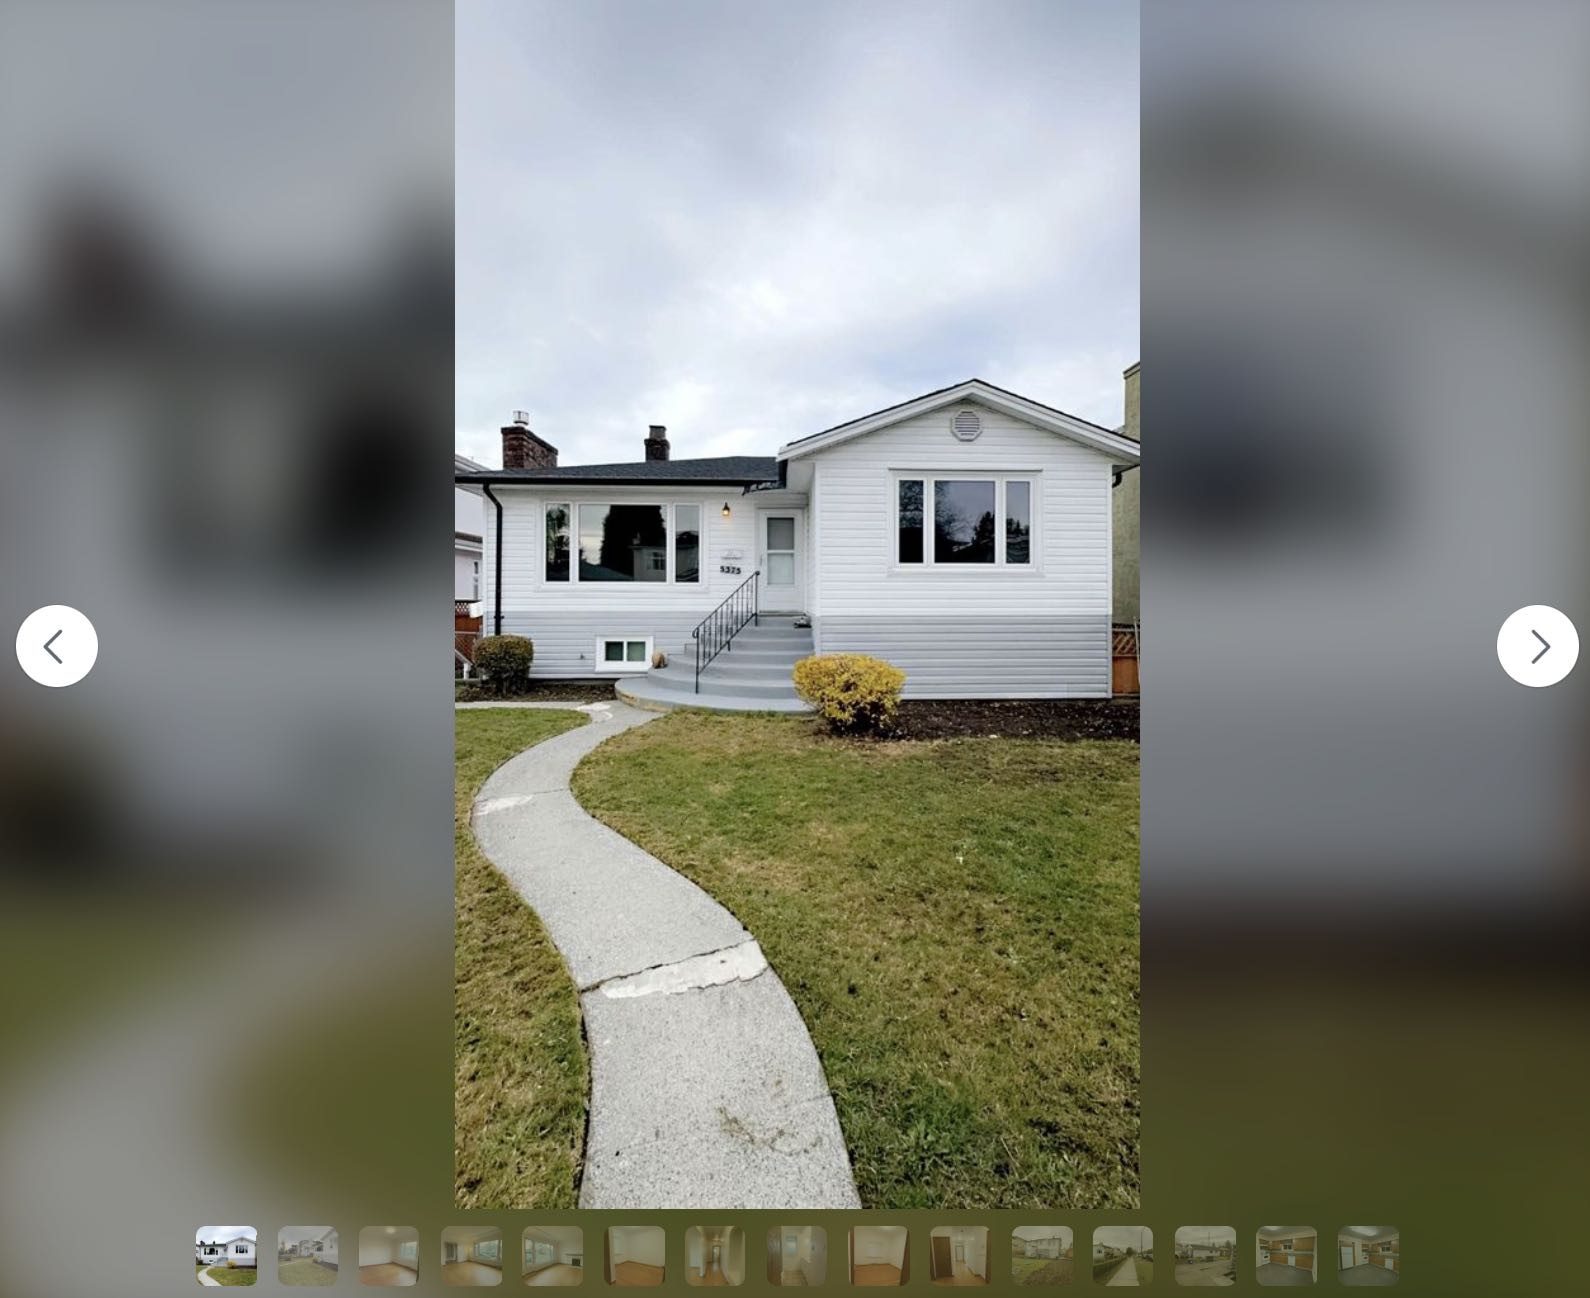 rent 4 bedroom house 5375 Inverness St, Vancouver, Fraser/Knight street